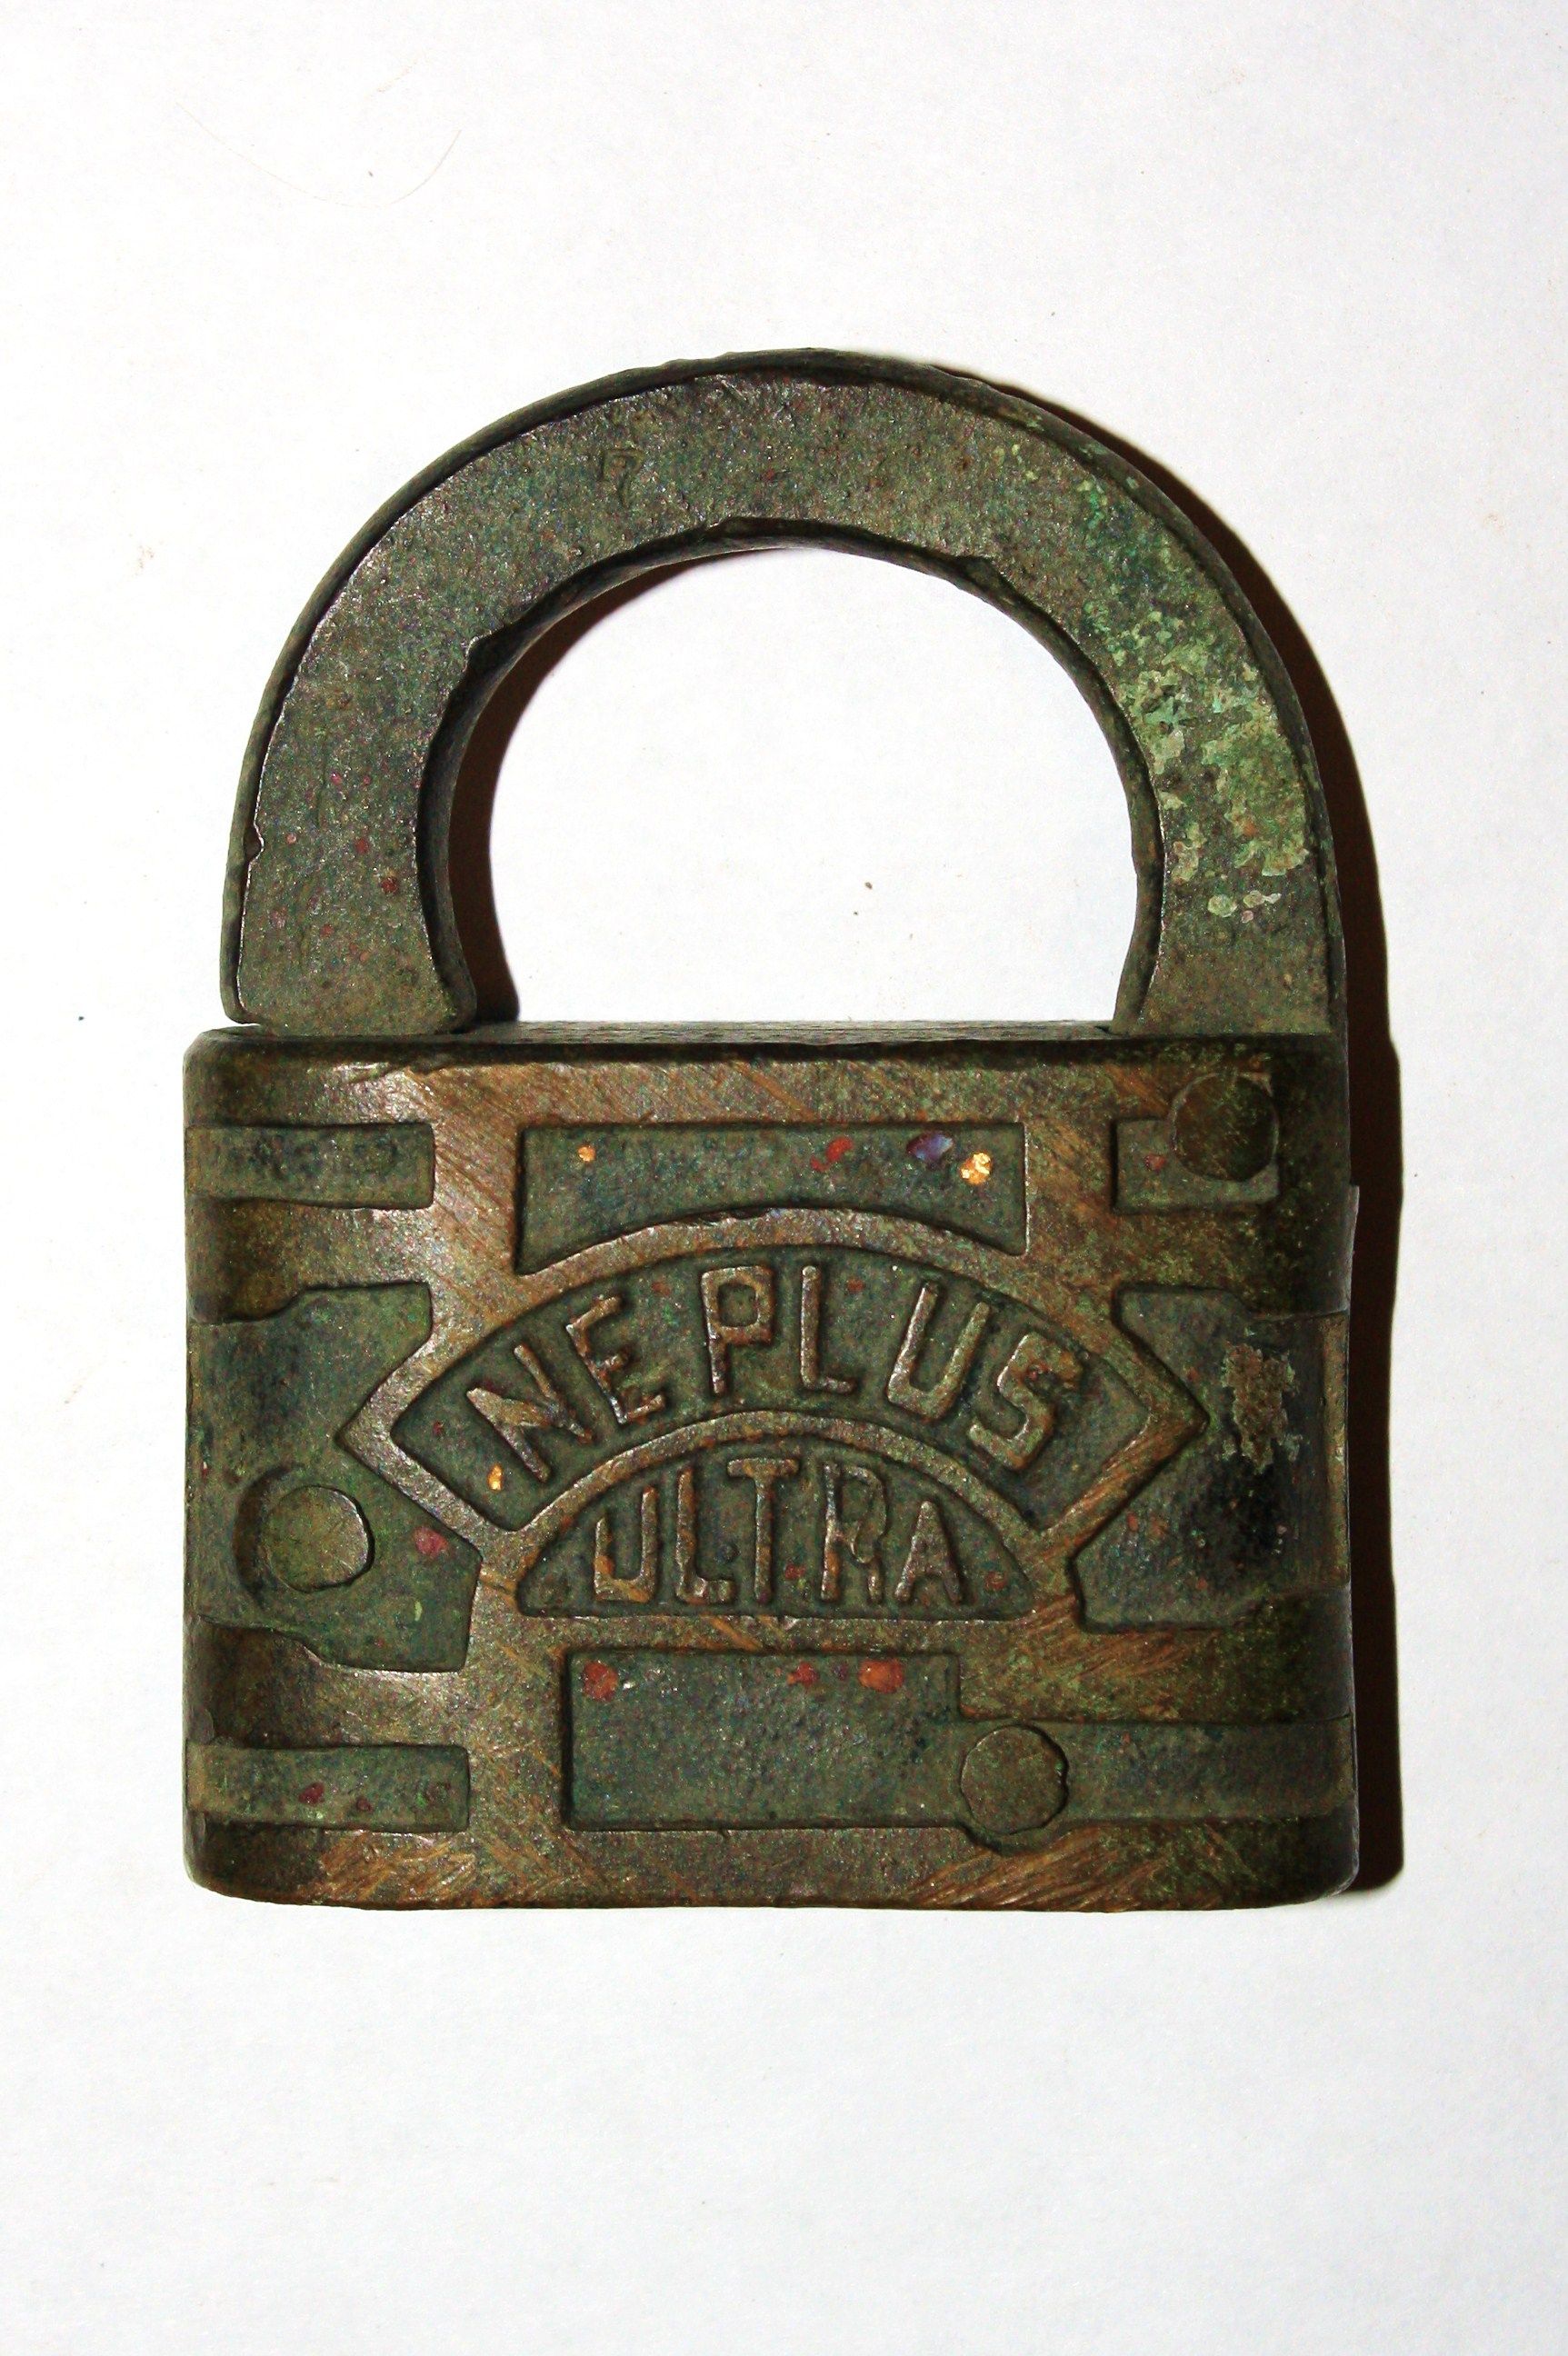 IMG 2229  My first and only padlock to date.  NE PLUS ULTRA circa?  Apparently the history of this is attached to George Price or Pierce? and it was e